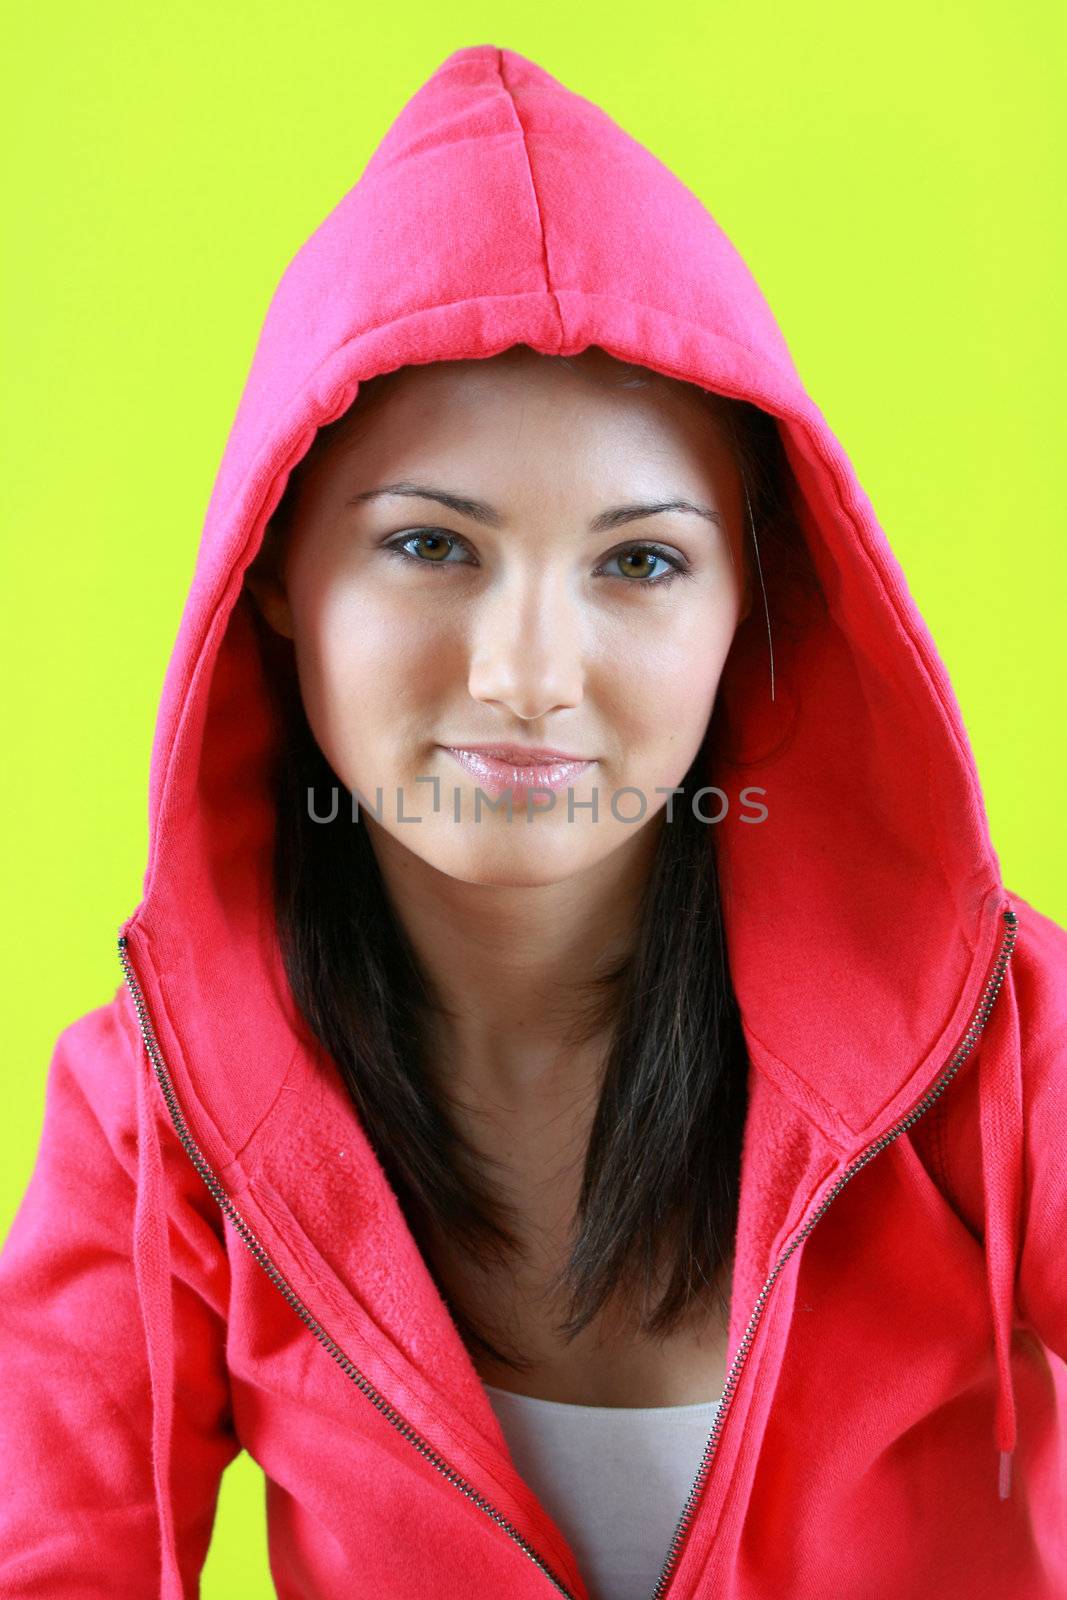 Portrait of young beautiful teen girl in pink hood on green background